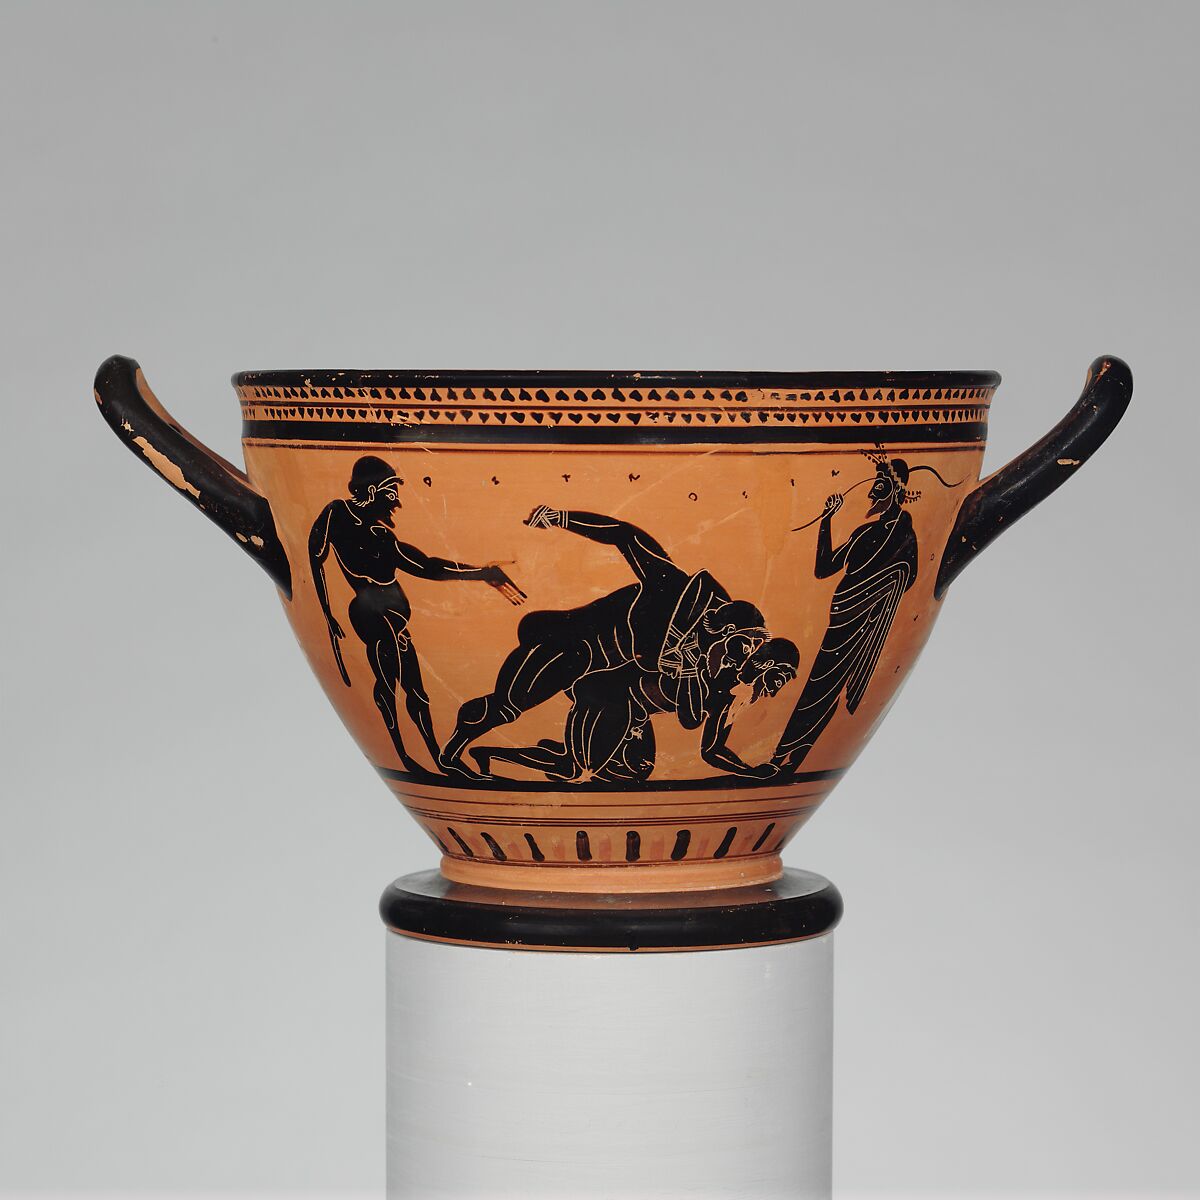 Attributed to the Theseus Painter, Terracotta skyphos (deep drinking cup), Greek, Attic, Archaic